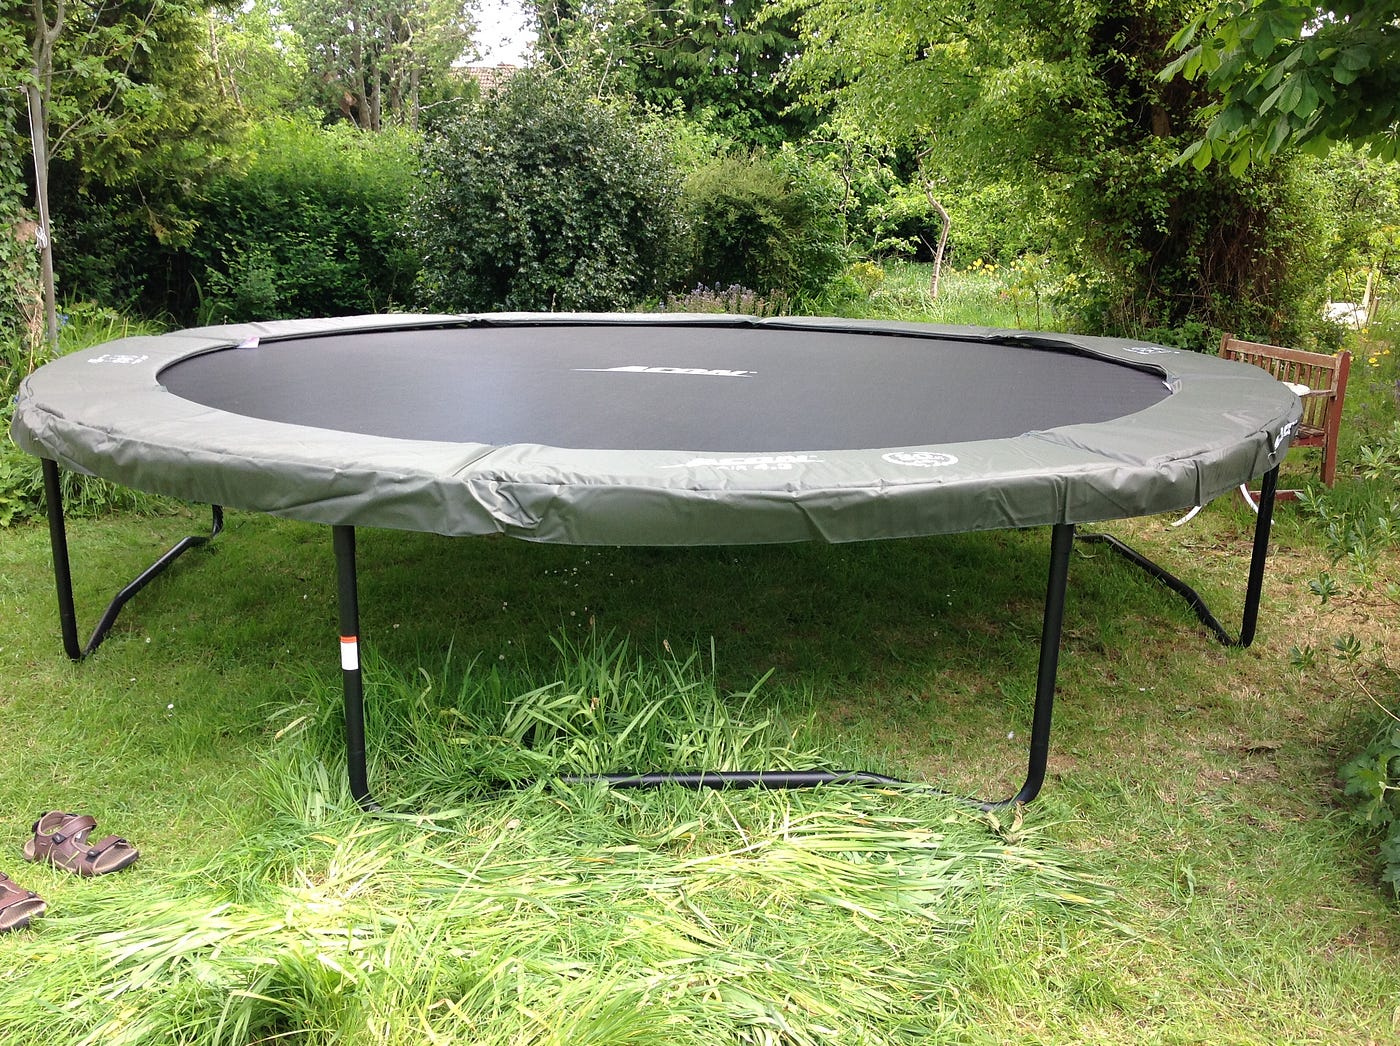 Finding out about trampolines the hard way | by Andrew Bindon | Medium